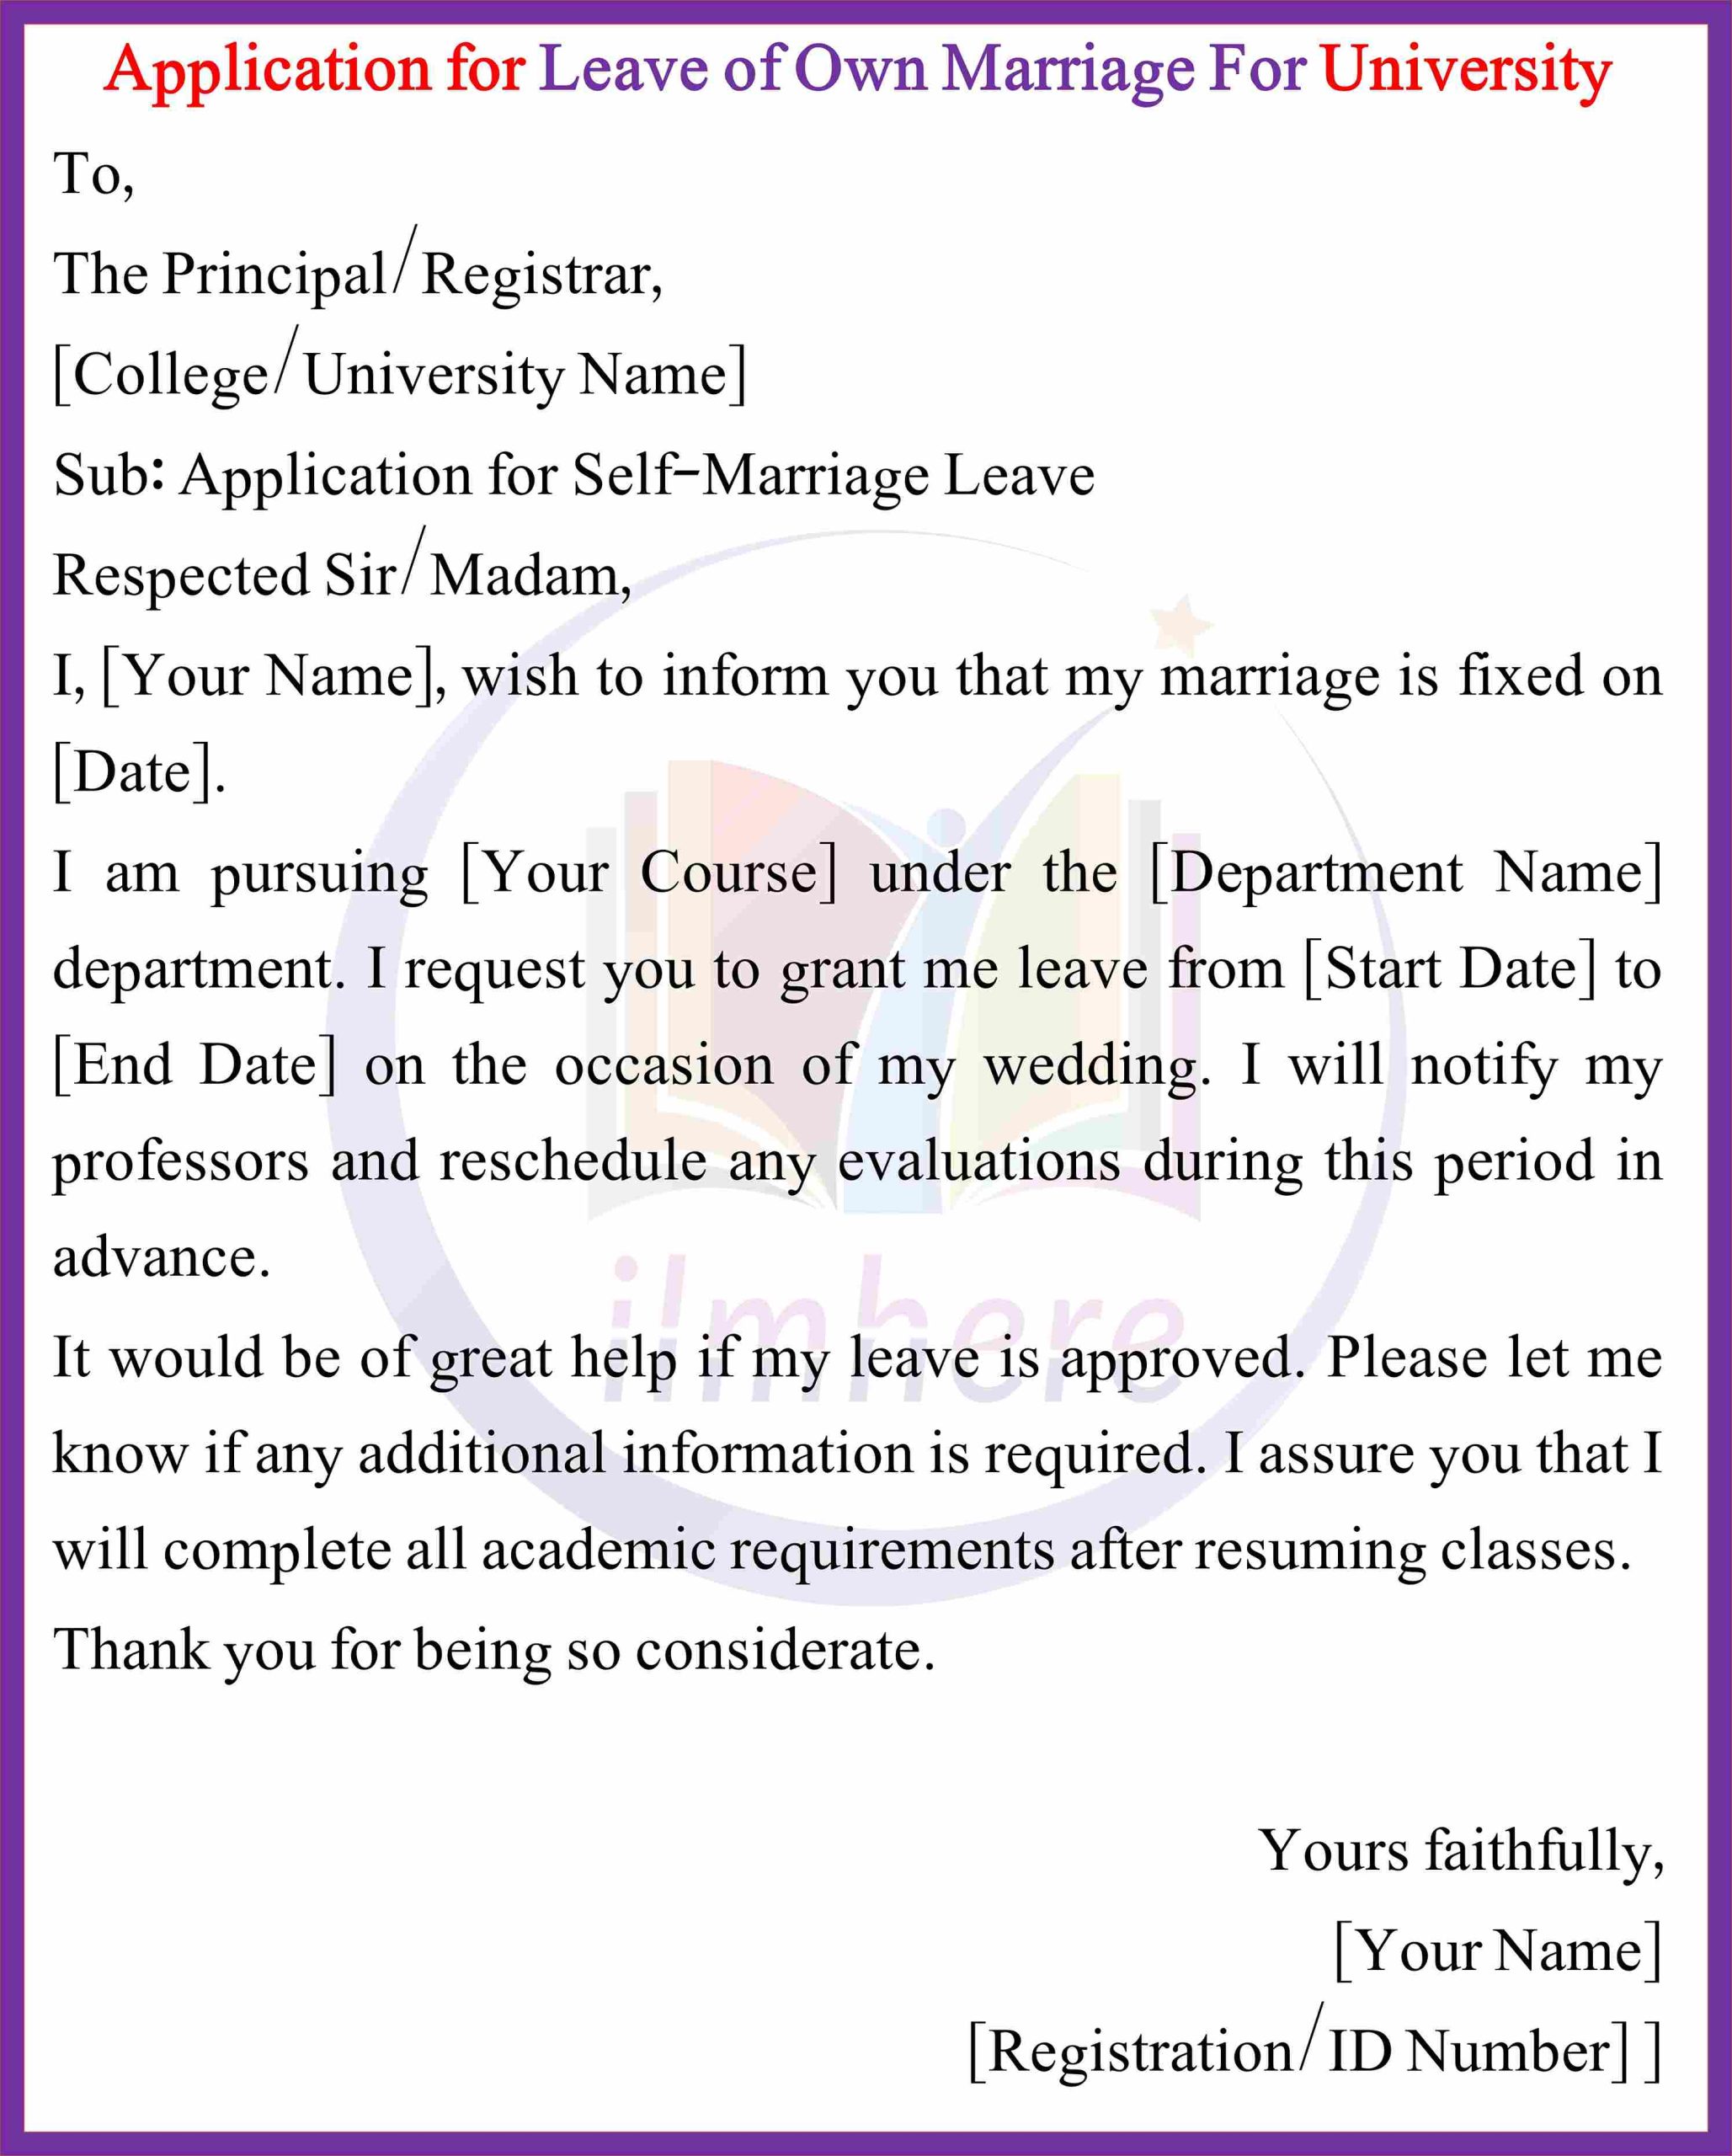 Self-marriage leave application For CollegeUniversity